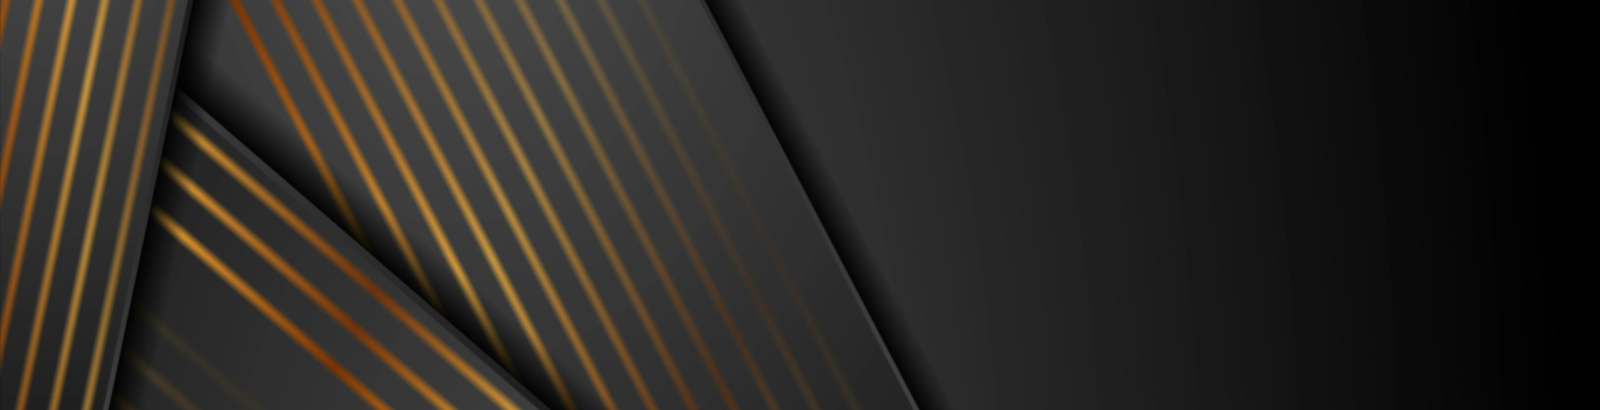 A black and grey gradient background with gold stripes on the left side.